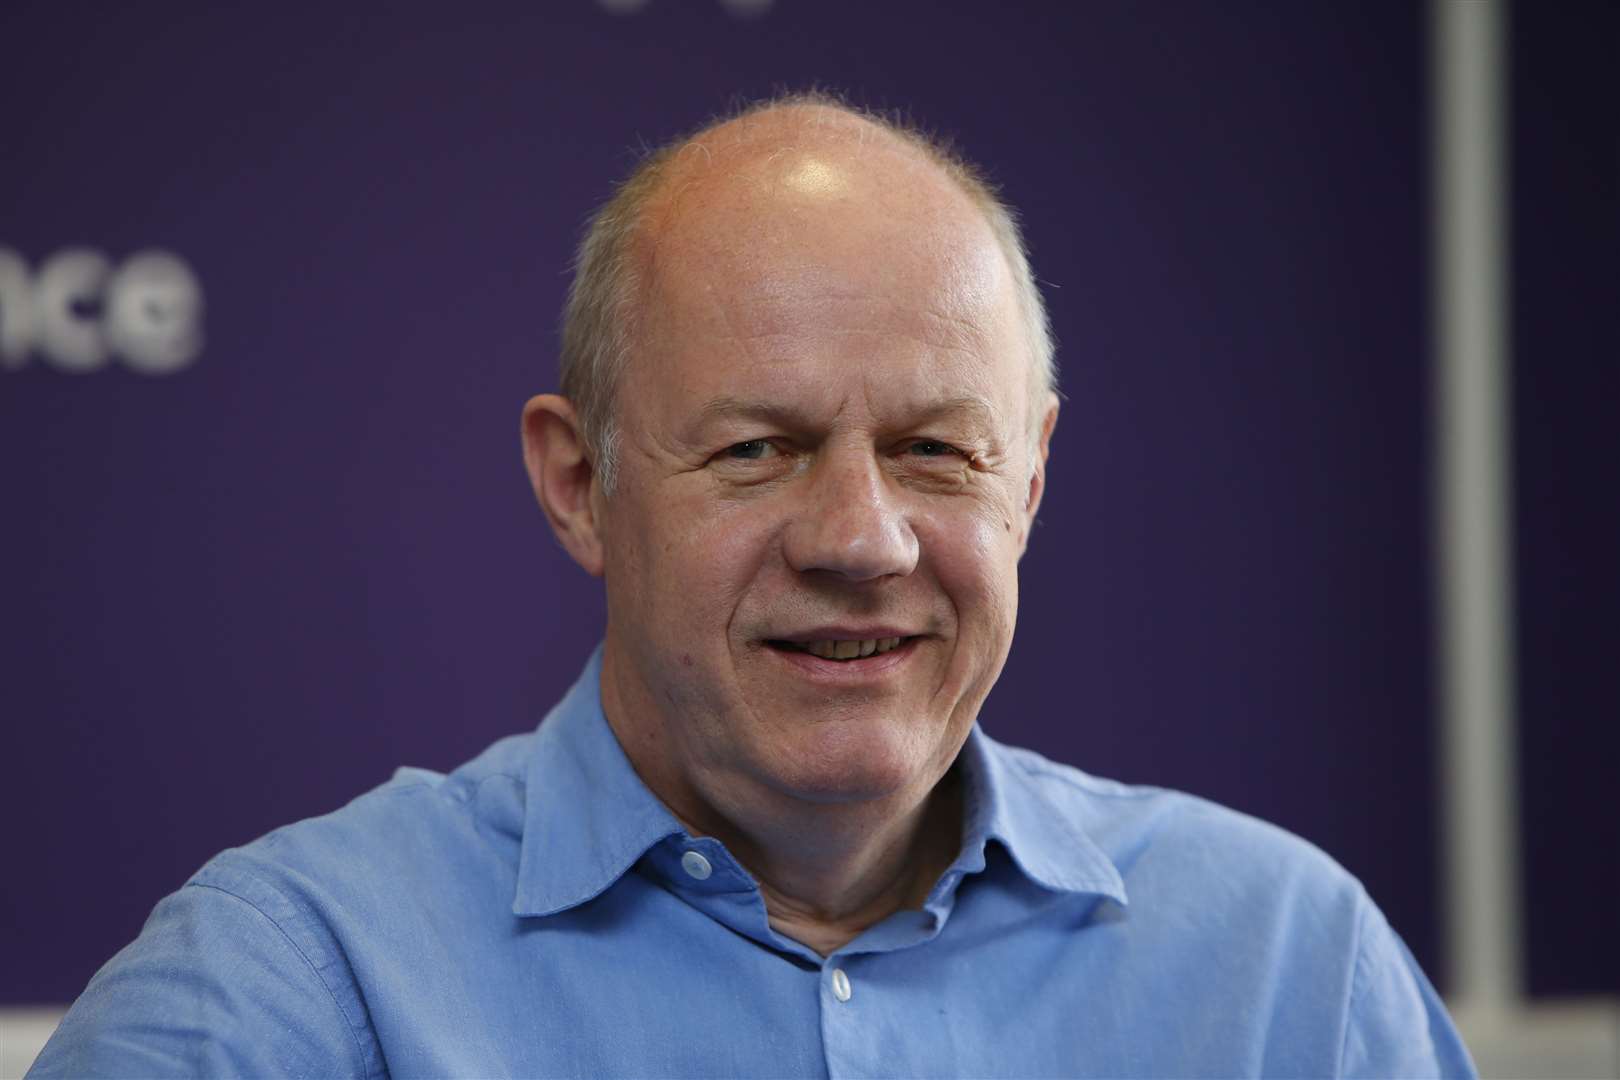 Damian Green MP has lauded the upcoming studio as "game changing" for Ashford